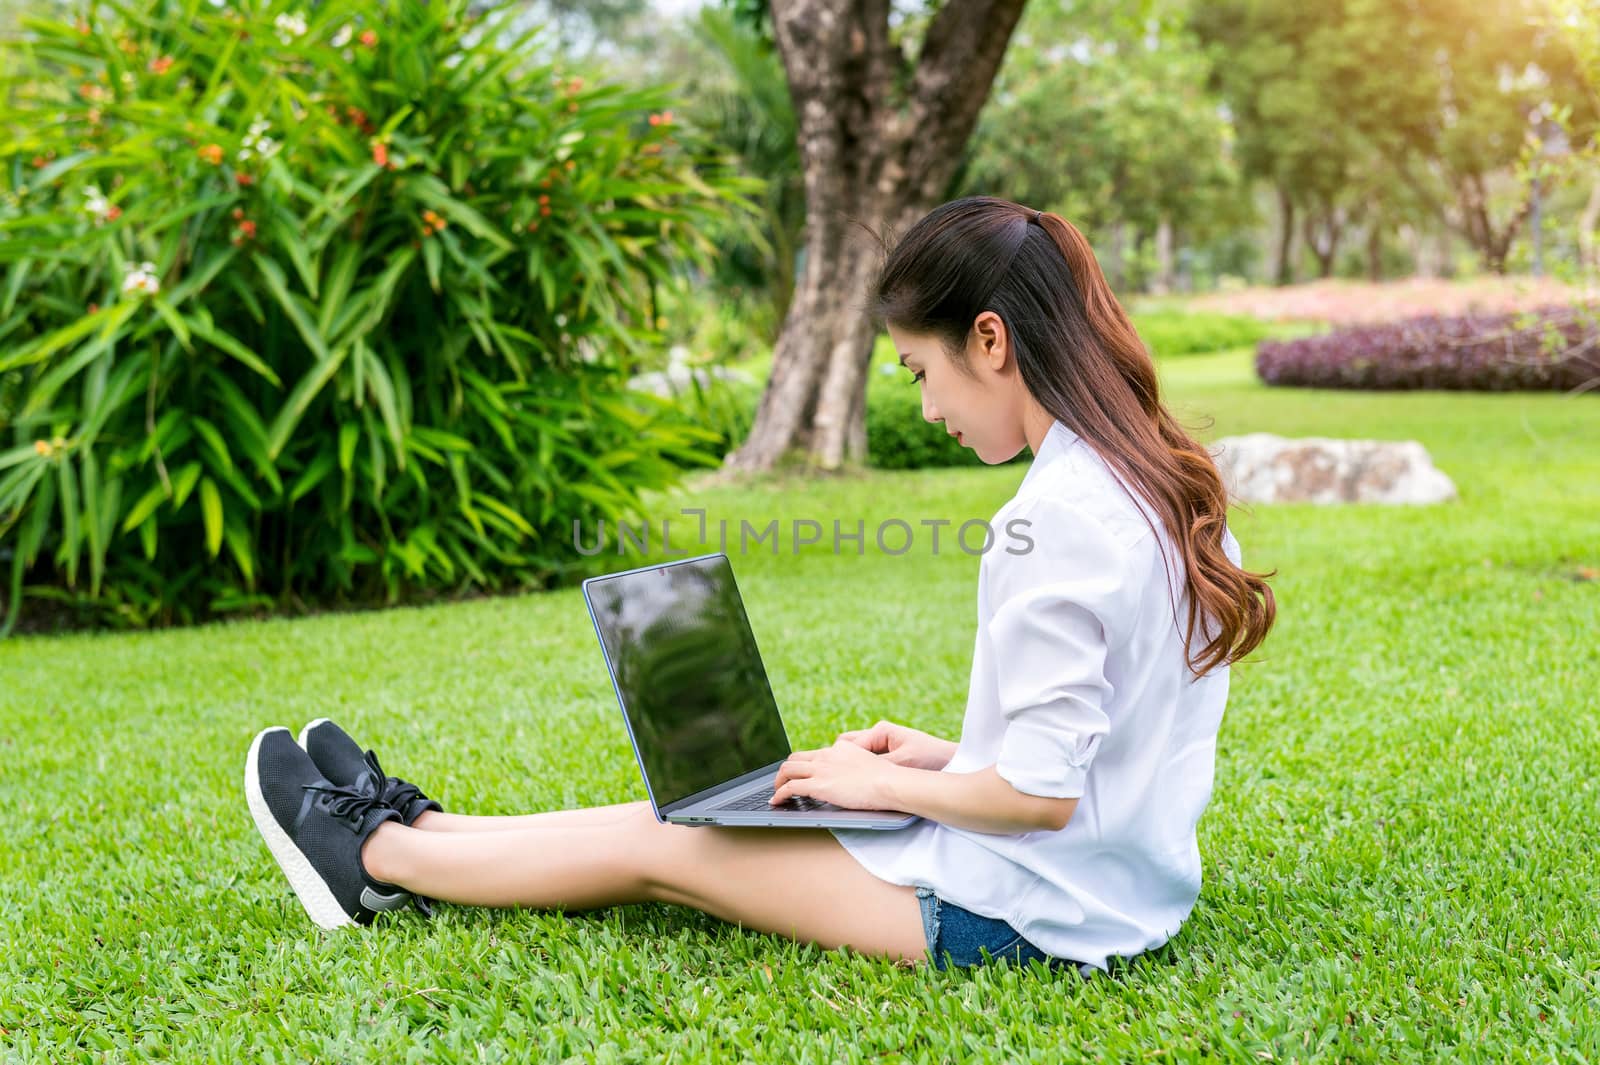 Young woman using laptop in park.